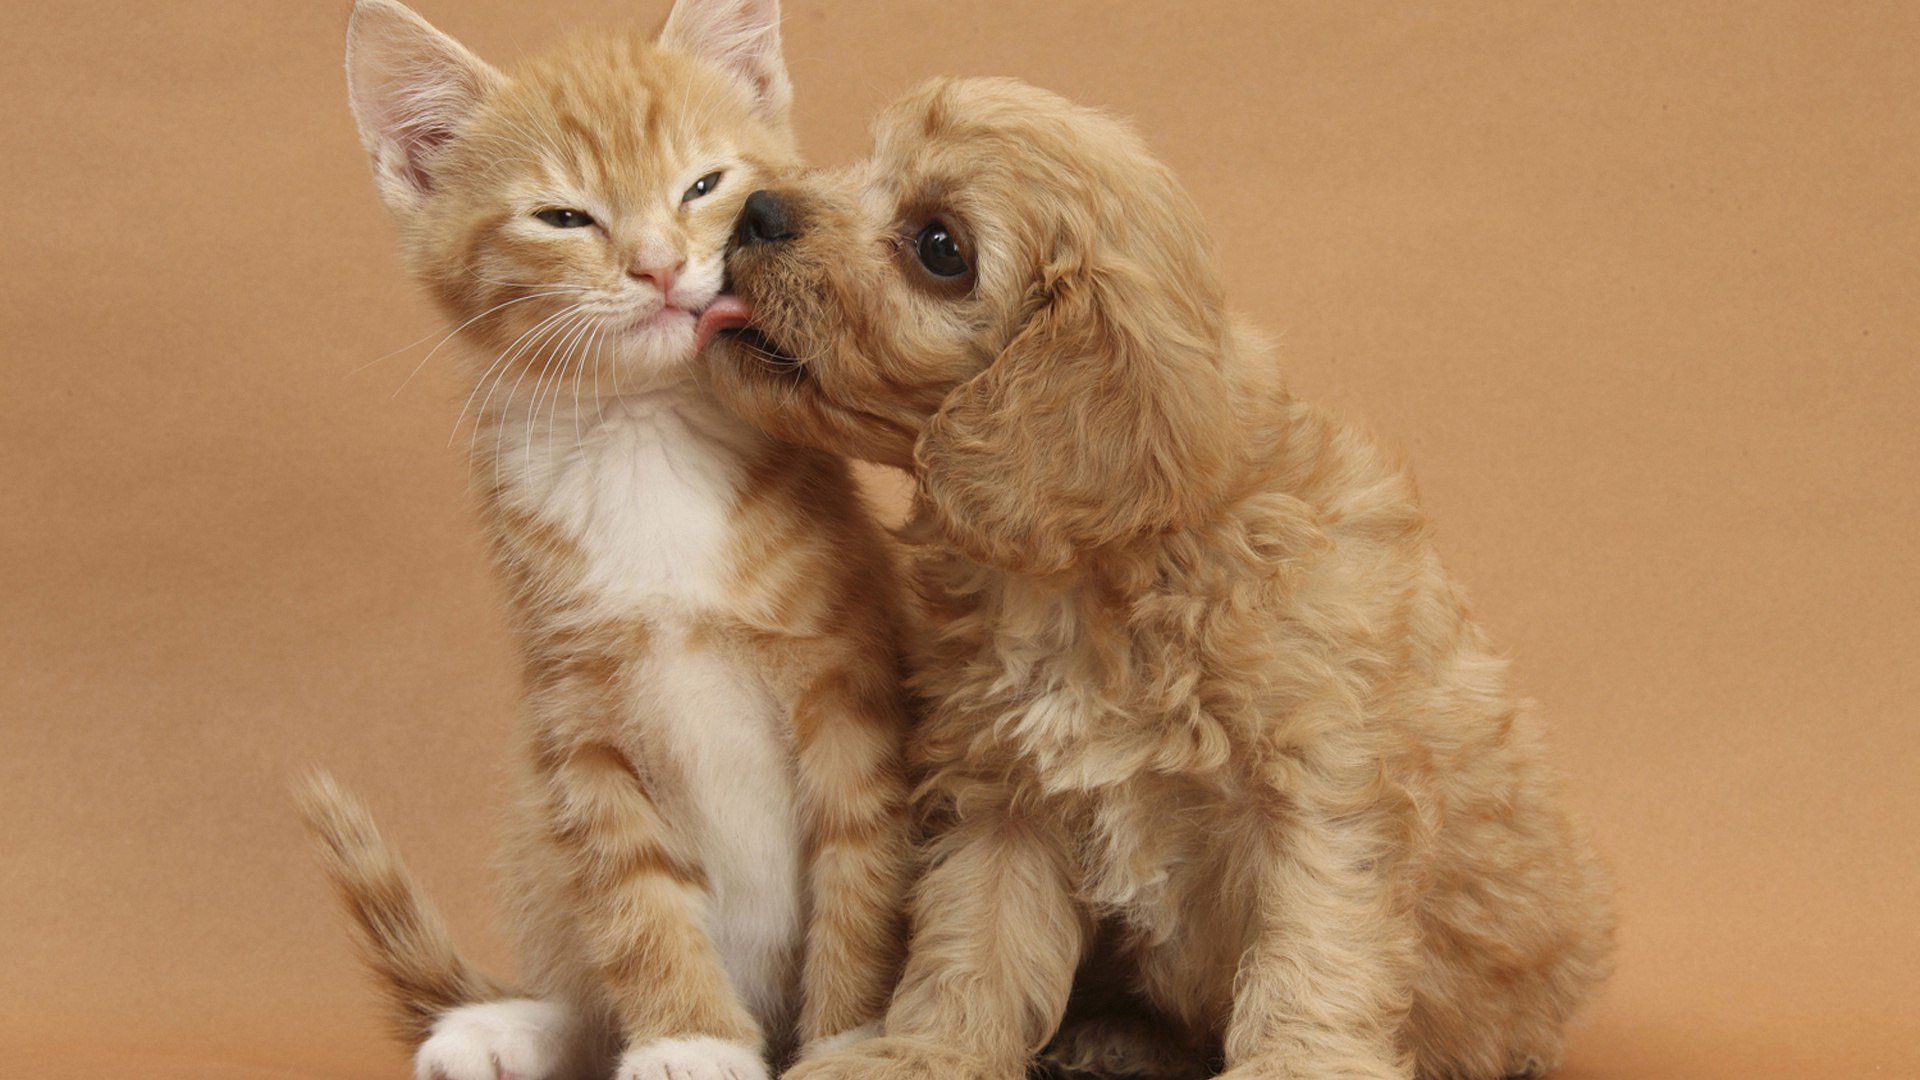 Puppy And Kitten Free Download Wallpaper